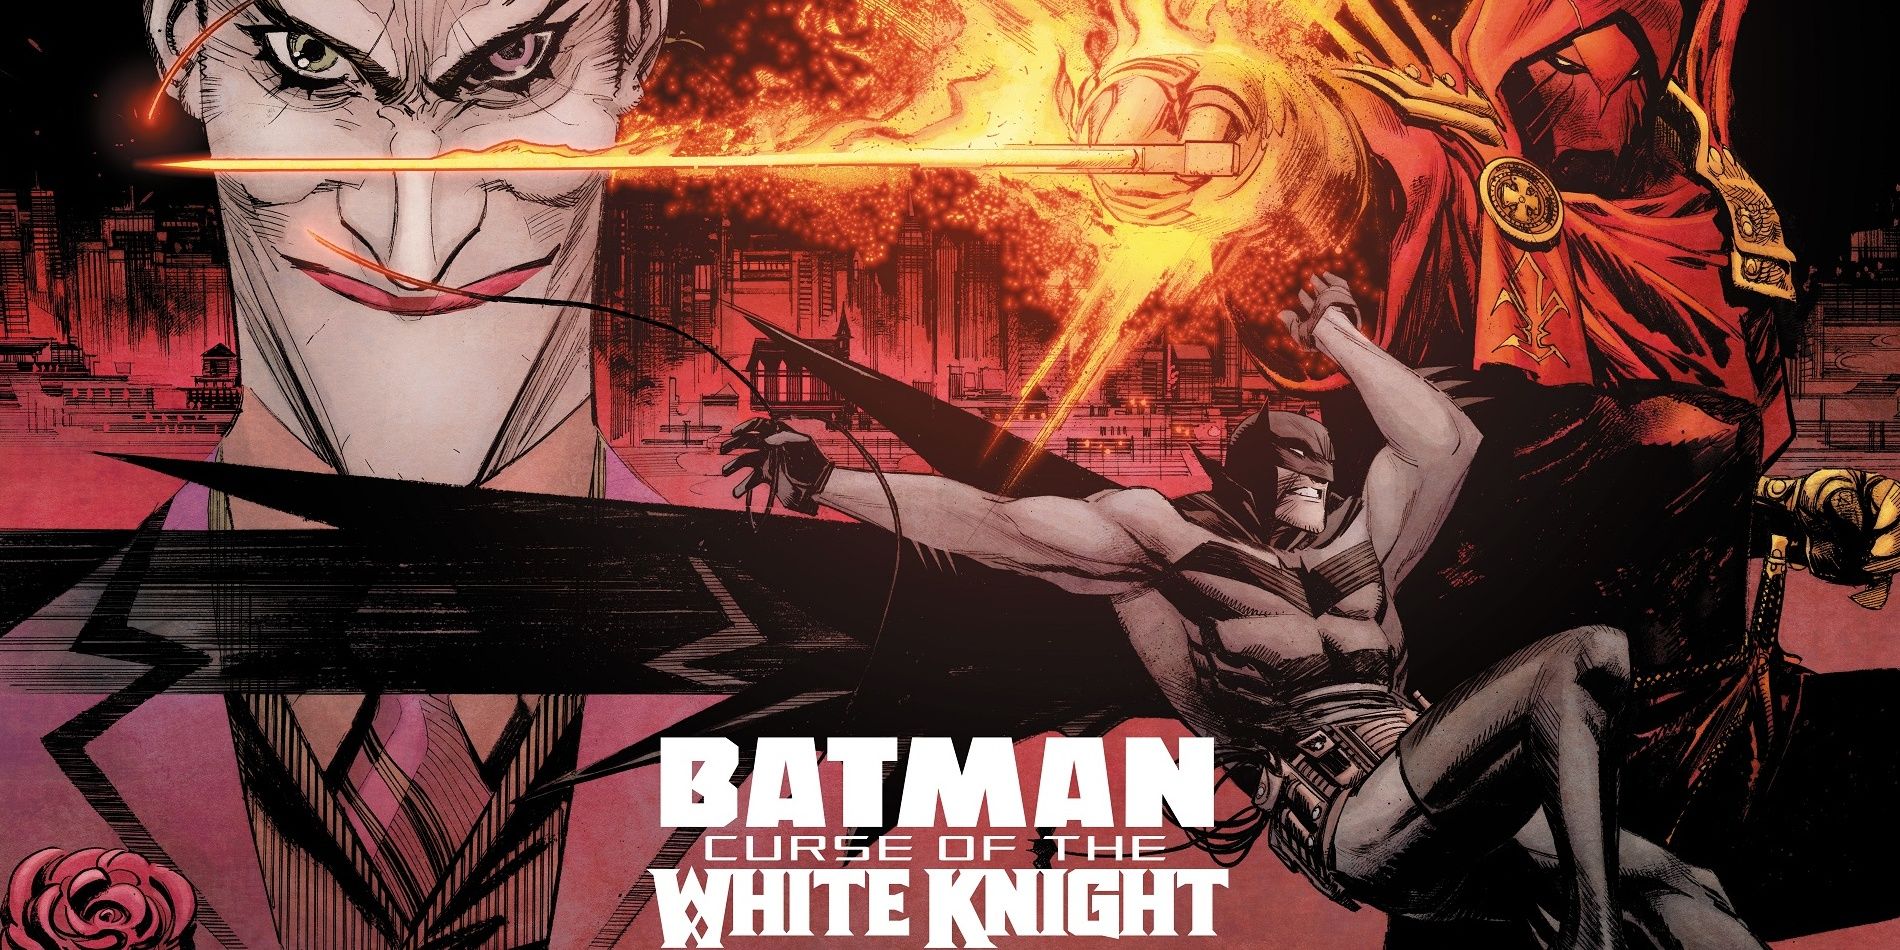 Promotional art for Sean Murphy's second White Knight series main entry, Curse of the White Knight